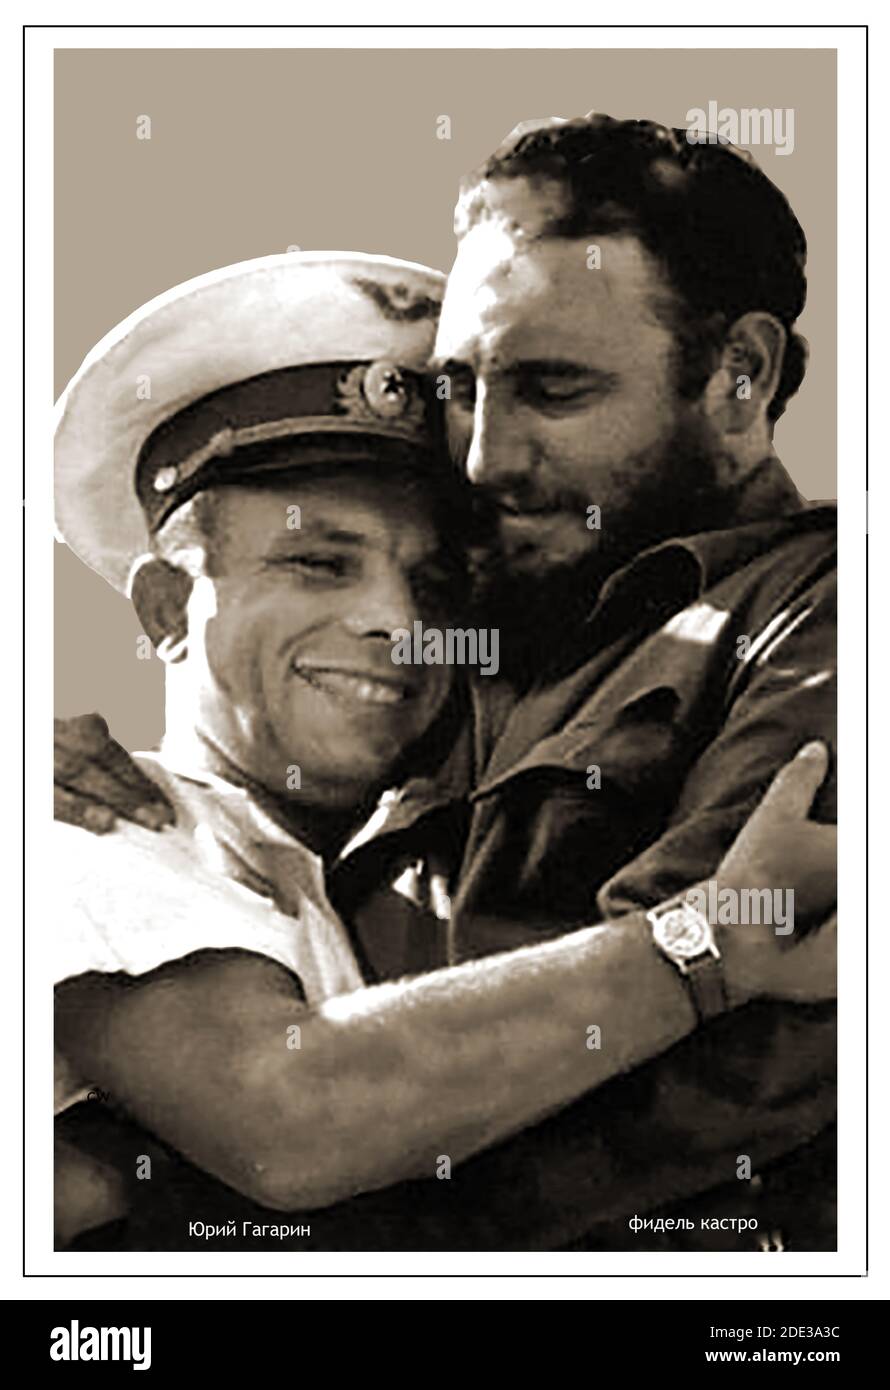 An old Russian postcard image showing Yuri Gagarin 'first man in space' & President Castro of Cuba embracing.  -- Yuri Alekseyevich Gagarin  ( 1934 – 1968) was a Soviet Air Force  pilot and cosmonaut ( a former steel foundry worker)  who was allegedly the first human to journey into outer space in Vostok I  on the 12th April 1961 (others claim Vladimir Ilyushin or even U.S. test pilot Joe Kittinger. Gagarin visited Casro in Cuba during his world tour only months after his flight. Stock Photo